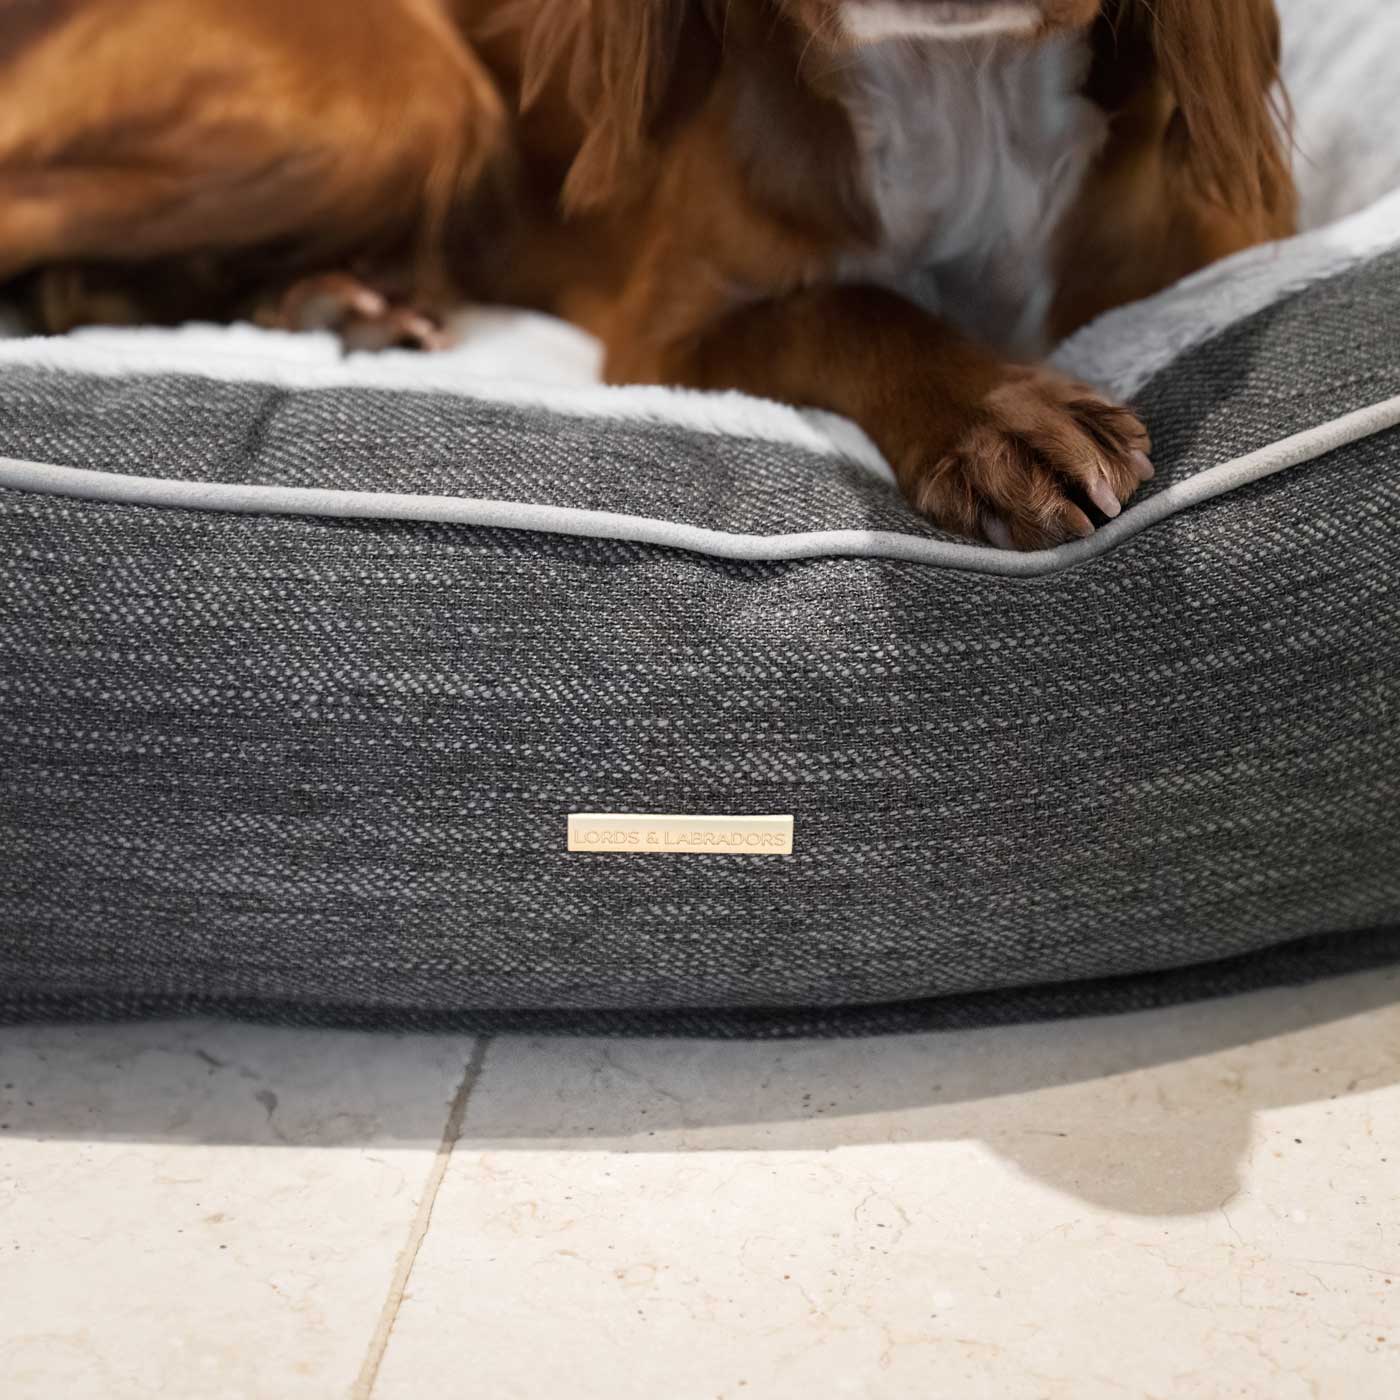 Lords & Labradors "The Nest" Dog Bed